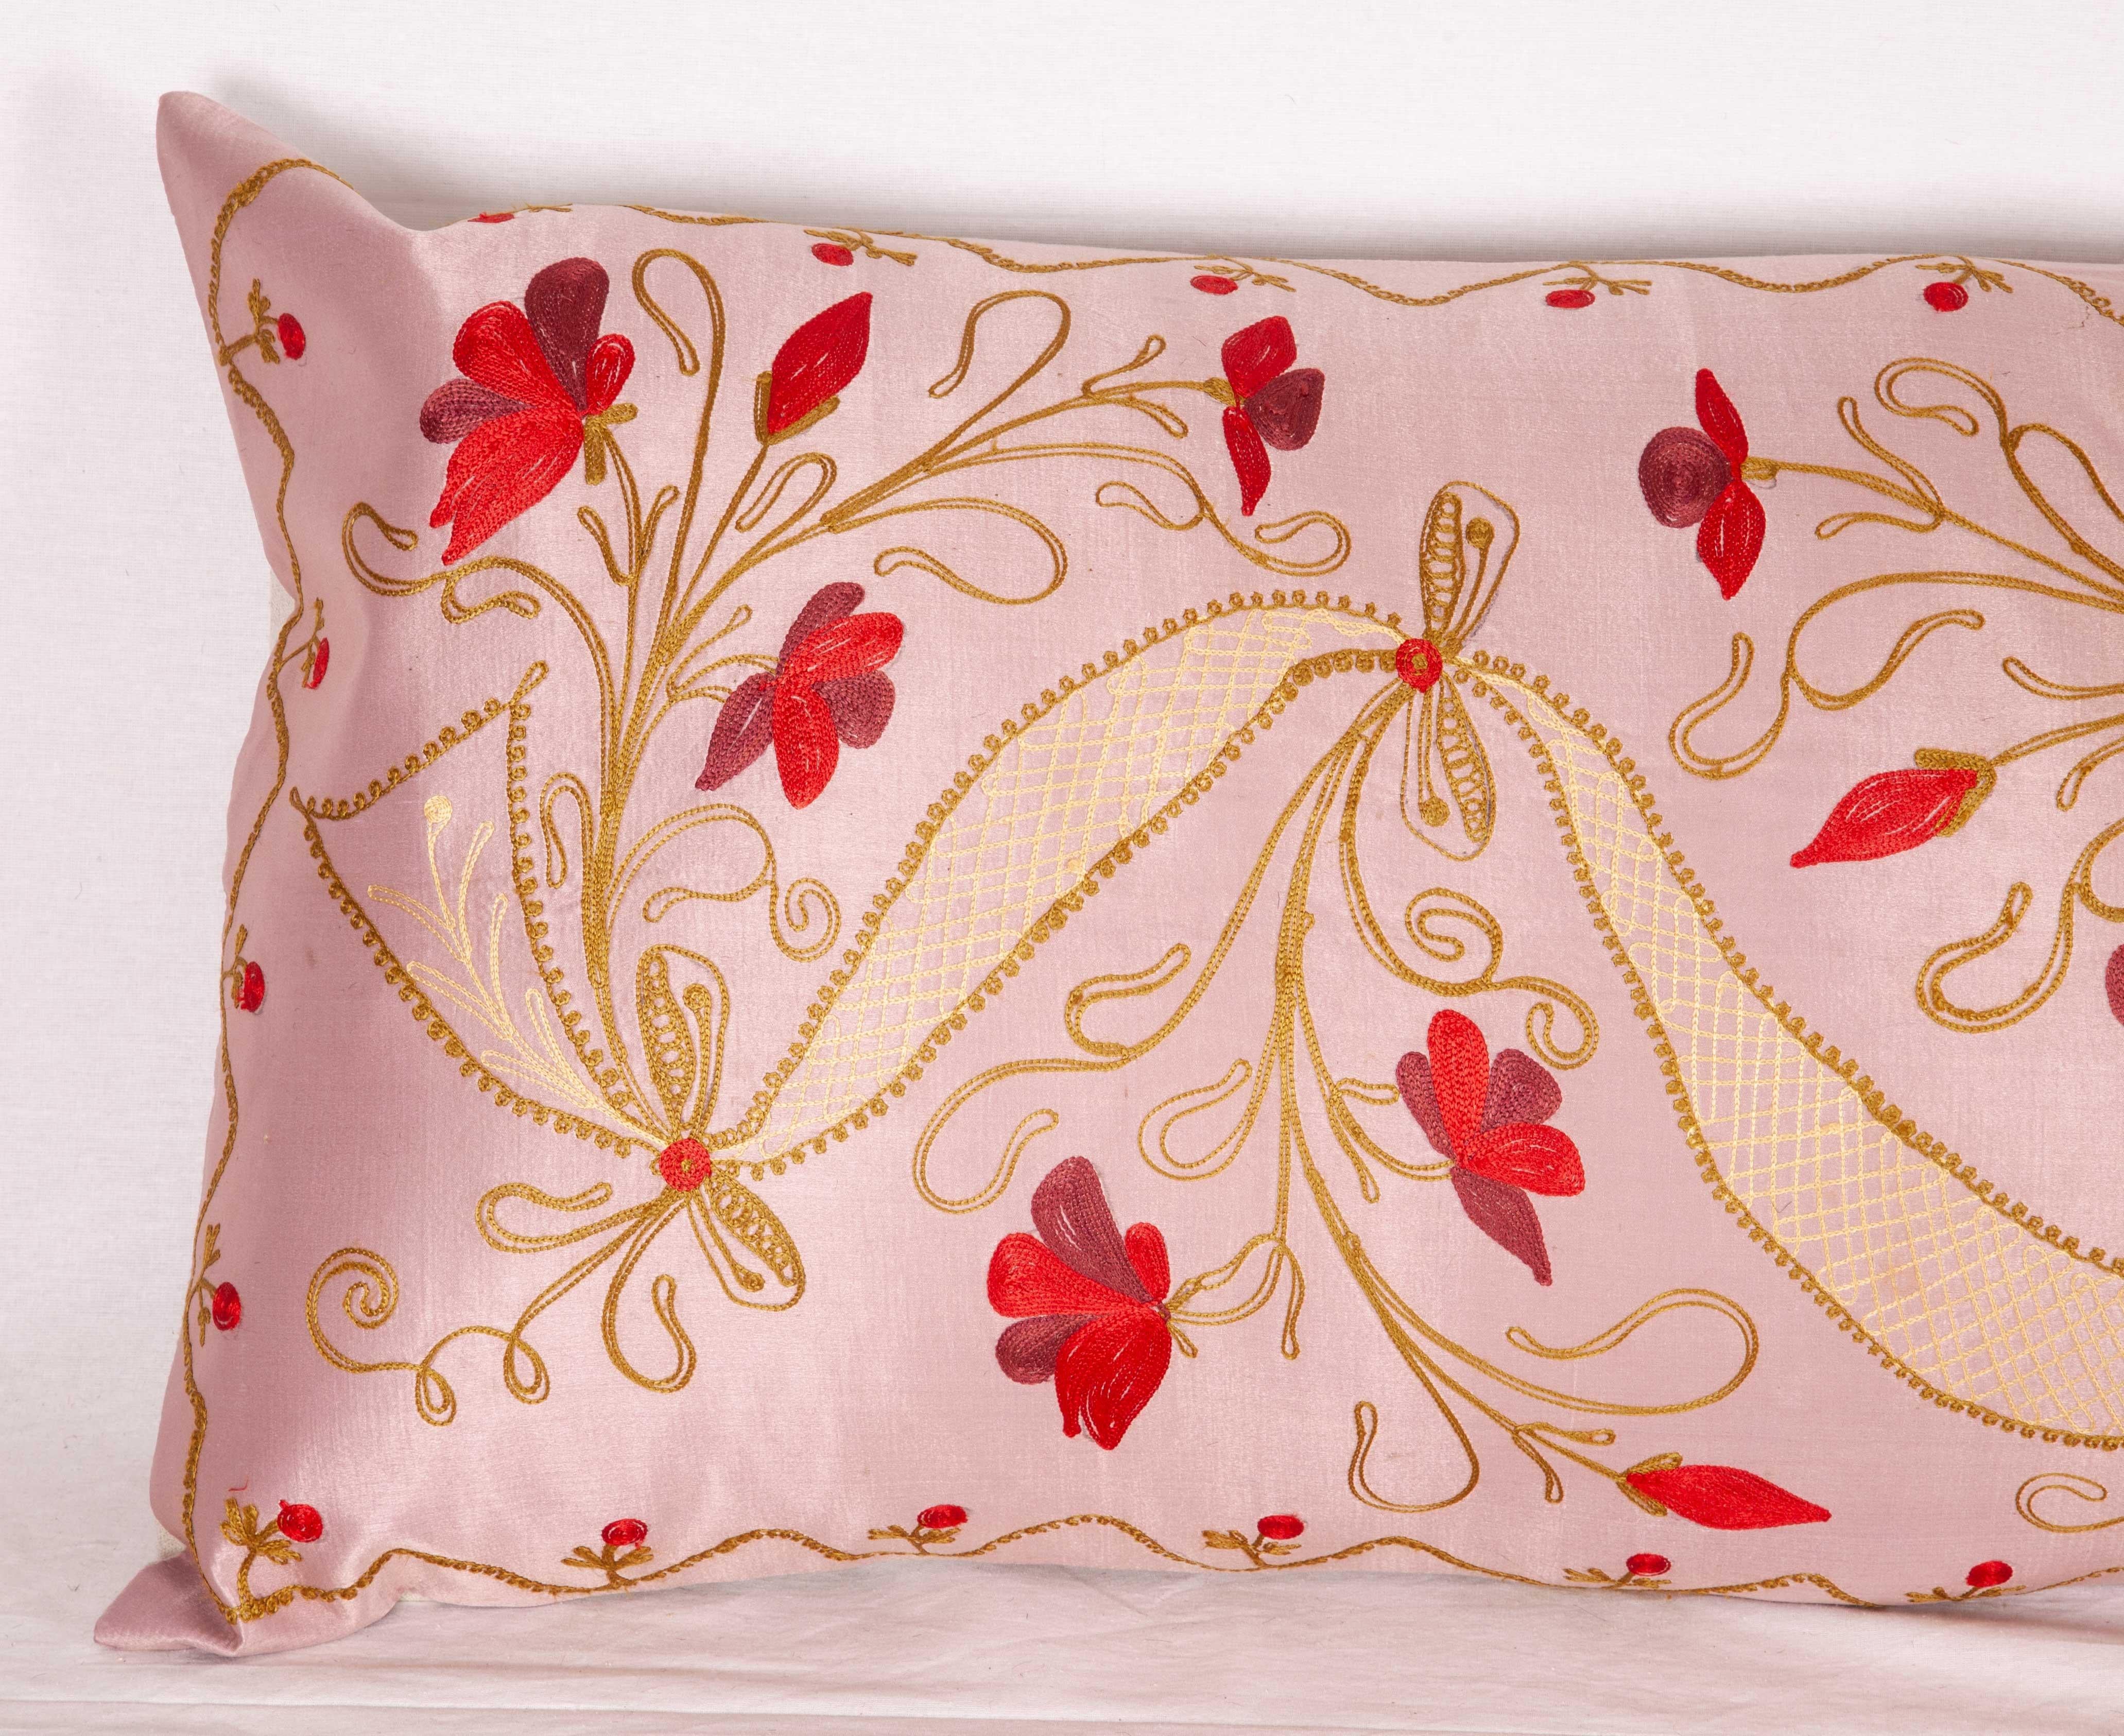 Suzani Large Pillow Case Fashioned from a Early 20th Century Syrian Divan Cover